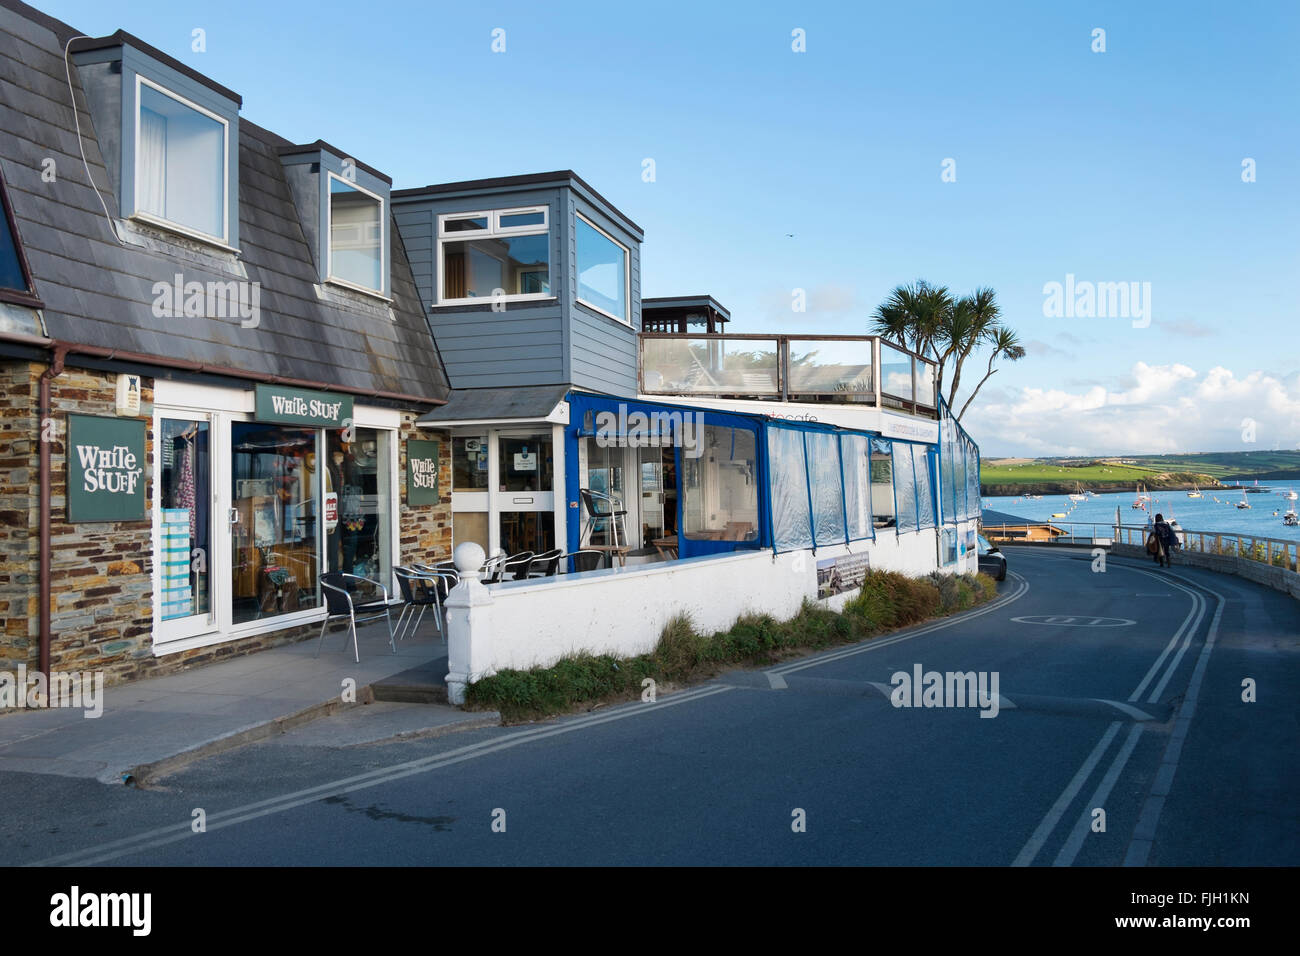 The Blue Tomato cafe and White Stuff shop at Rock, Cornwall, UK. Stock Photo